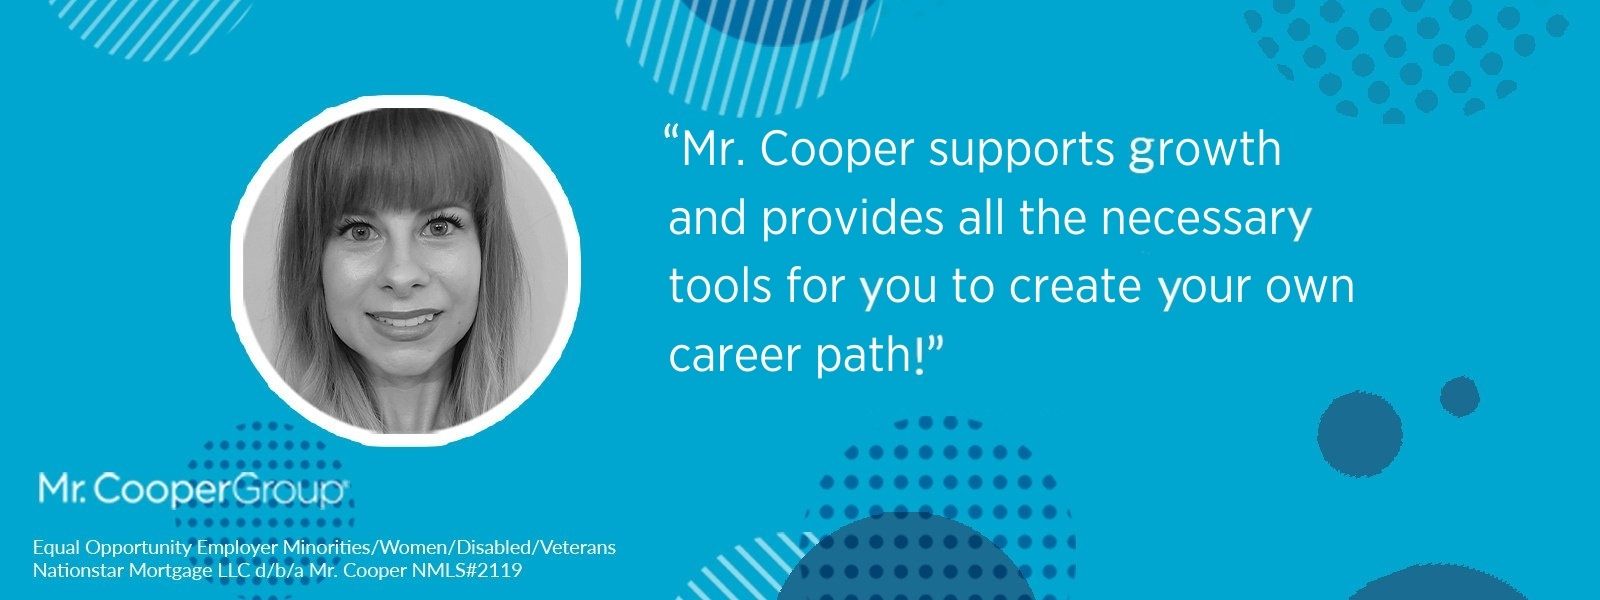 Photo of Samantha in a graphic with the Mr. Cooper Group logo and a quote: "Mr. Cooper supports growth and provides all the necessary tools for you to create your own career path!" Disclaimers under her photo read: "Equal Opportunity Employer Minorities/Women/Disabled/Veterans" and "Nationstar Mortgage LLC d/b/a Mr. Cooper NMLS#2119"